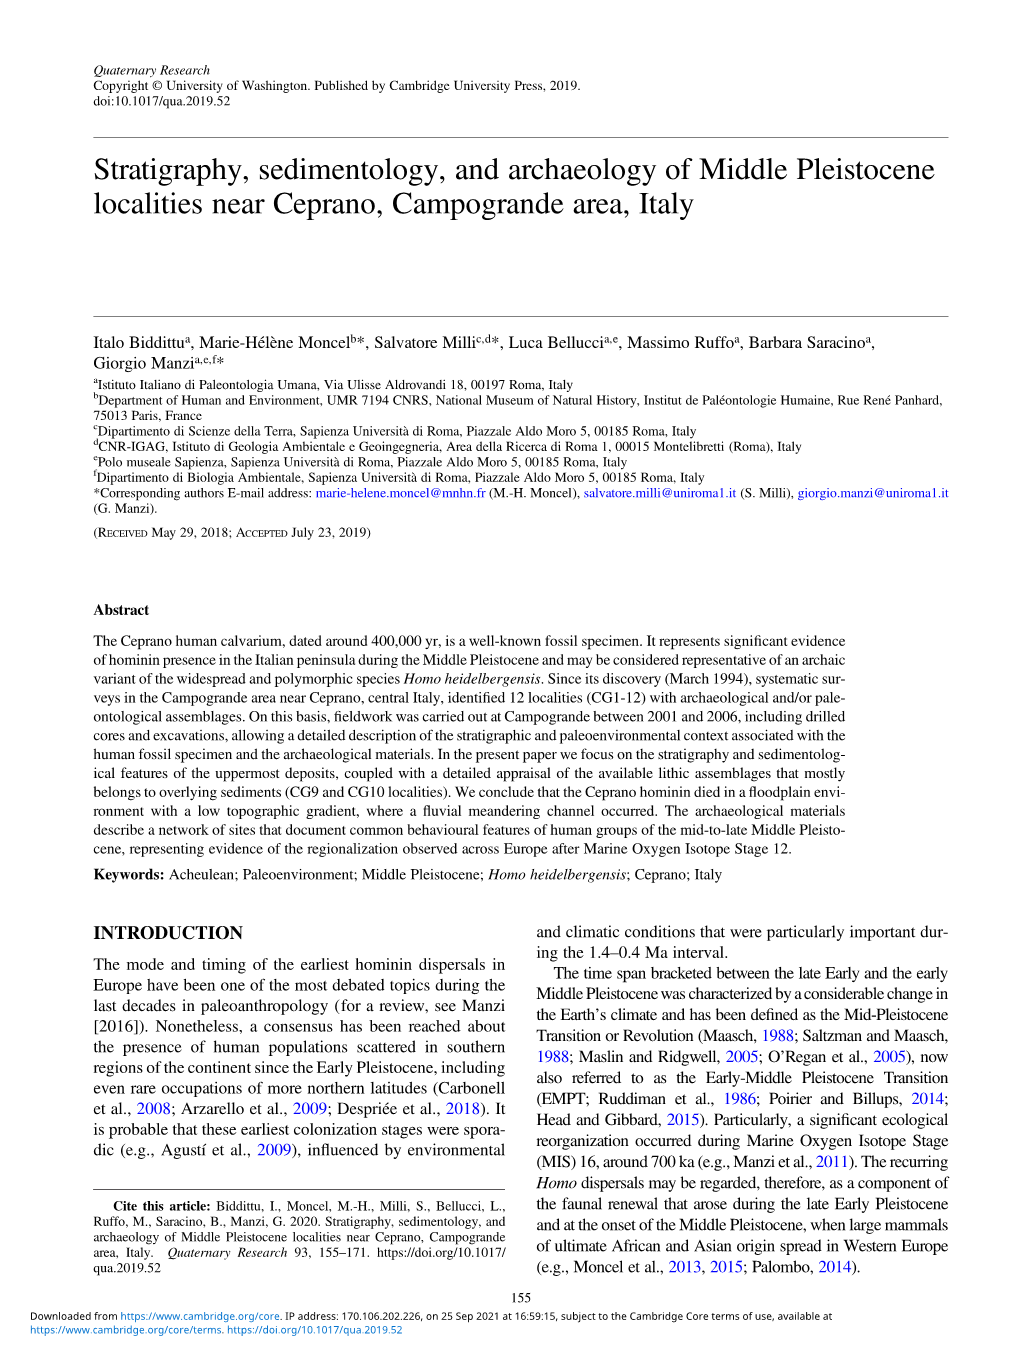 Stratigraphy, Sedimentology, and Archaeology of Middle Pleistocene Localities Near Ceprano, Campogrande Area, Italy